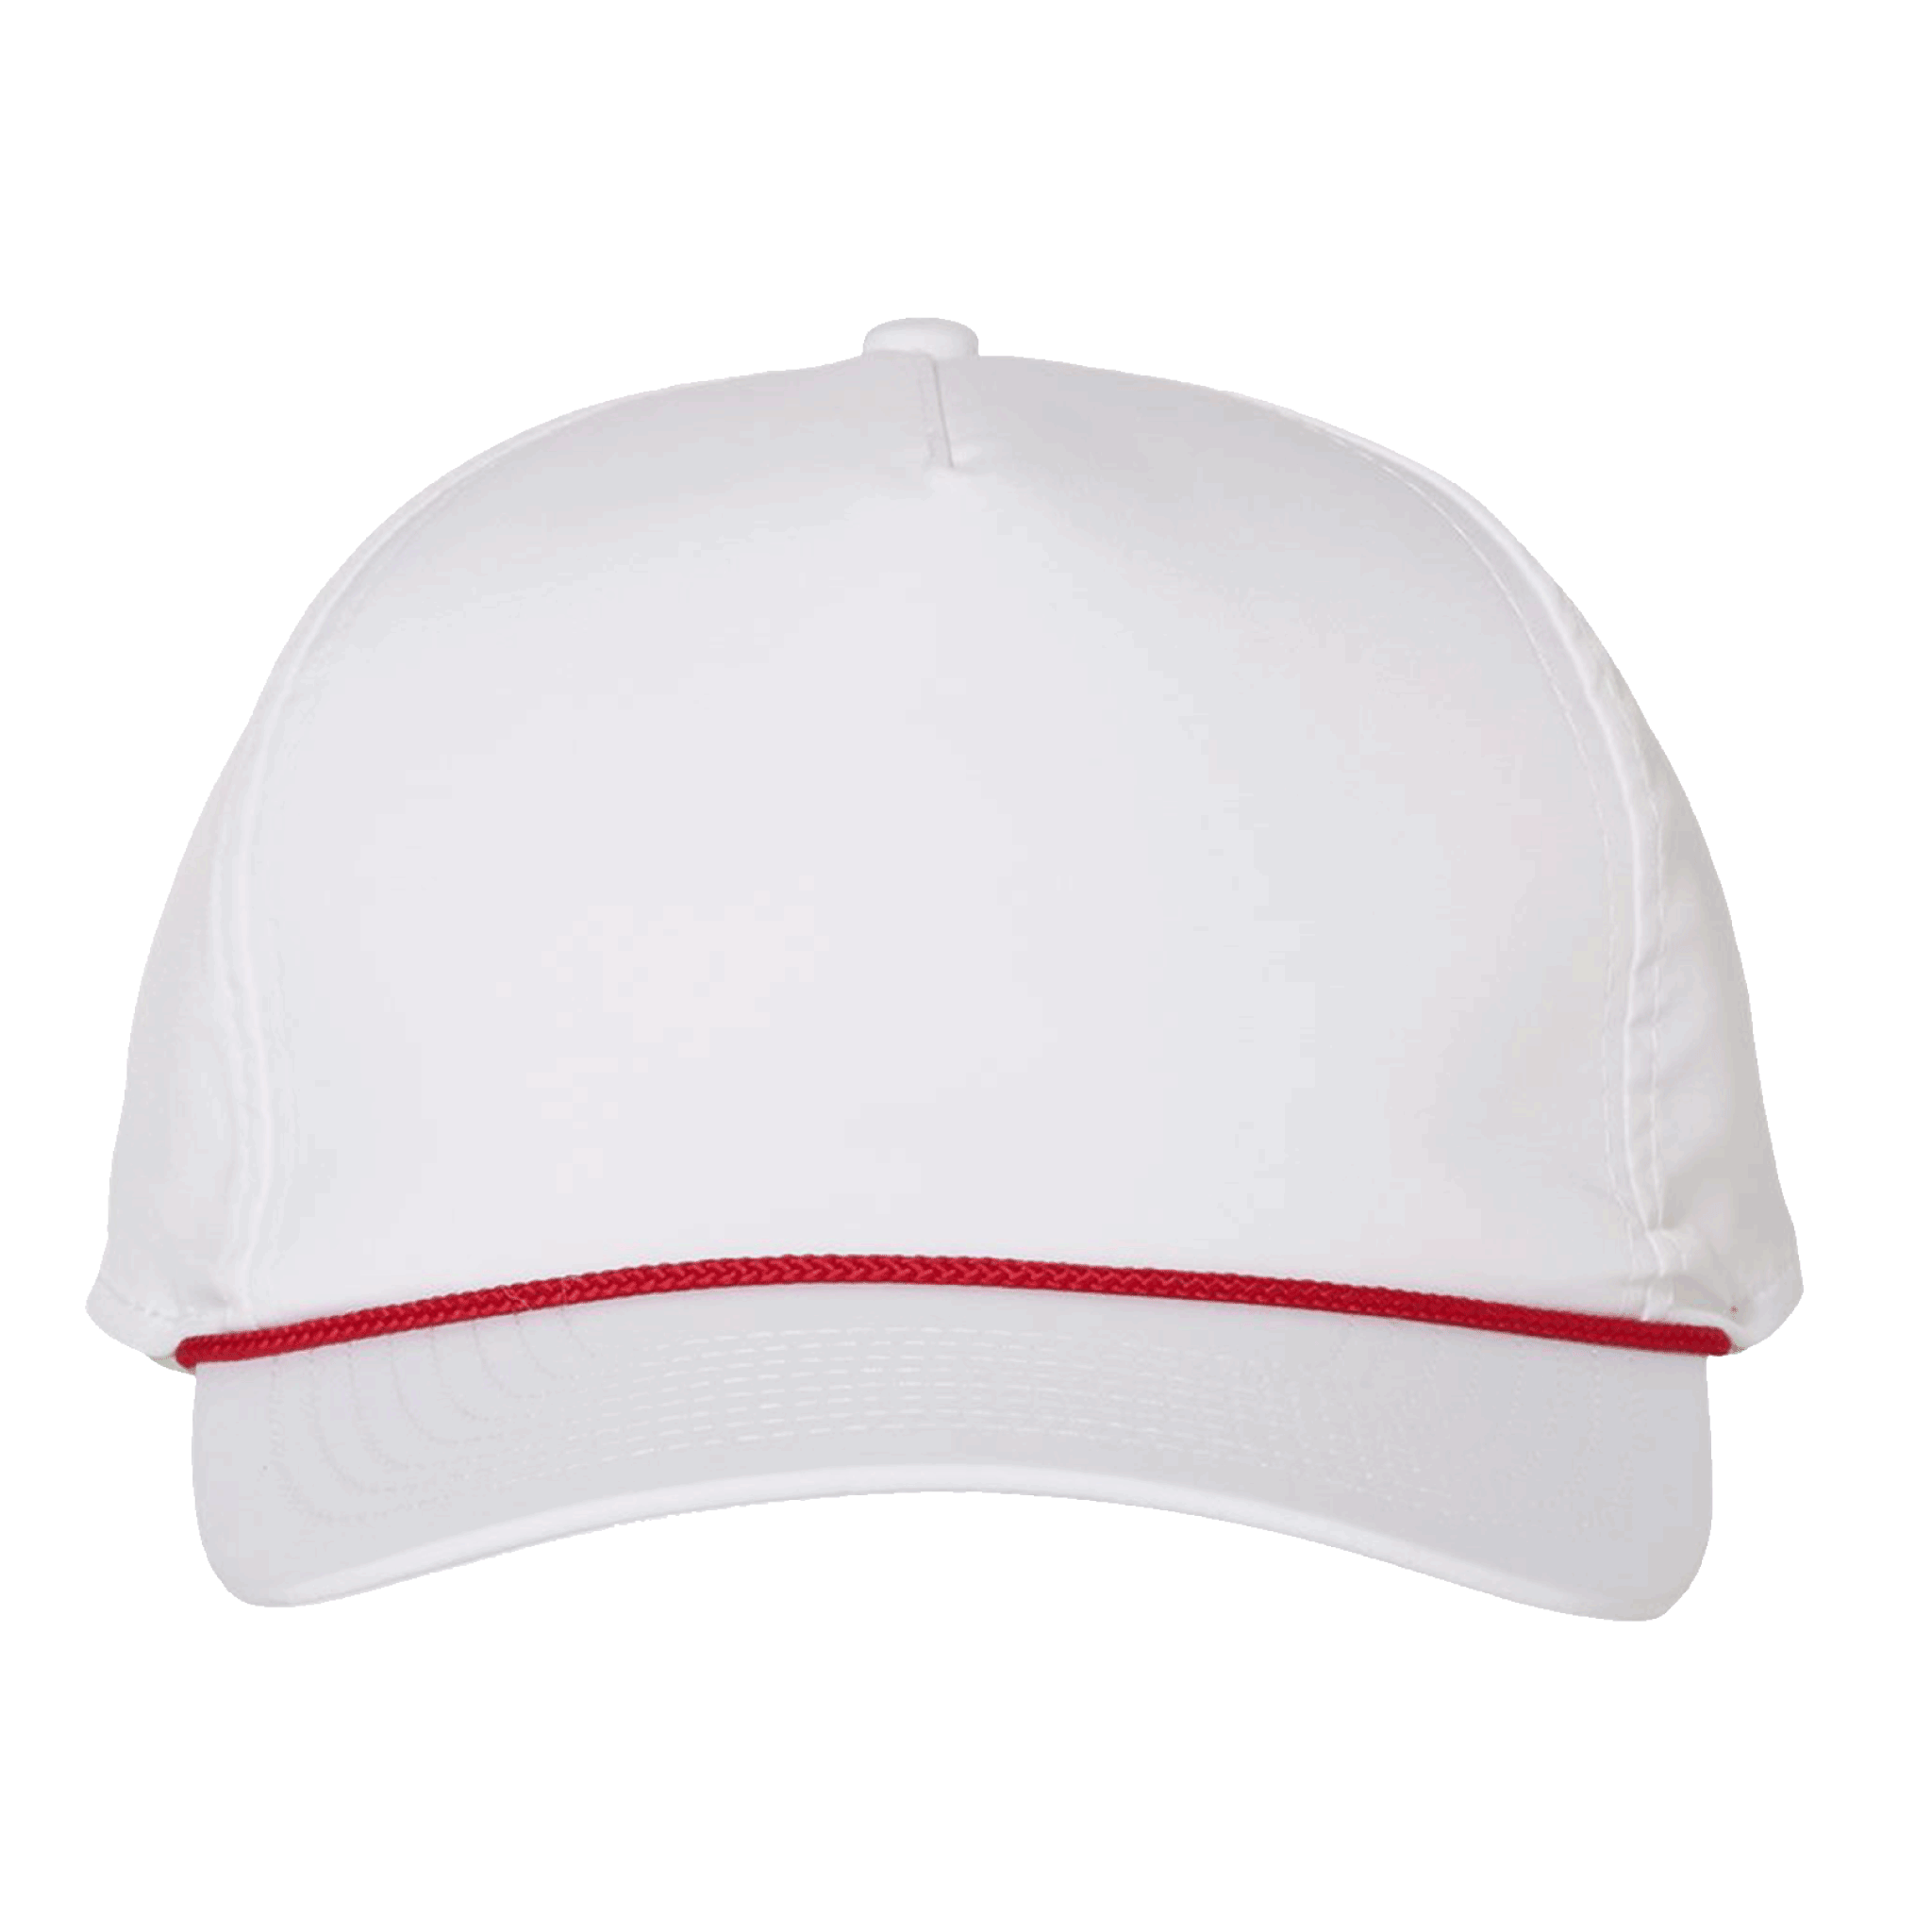 5054.White-Red:One Size.TCP